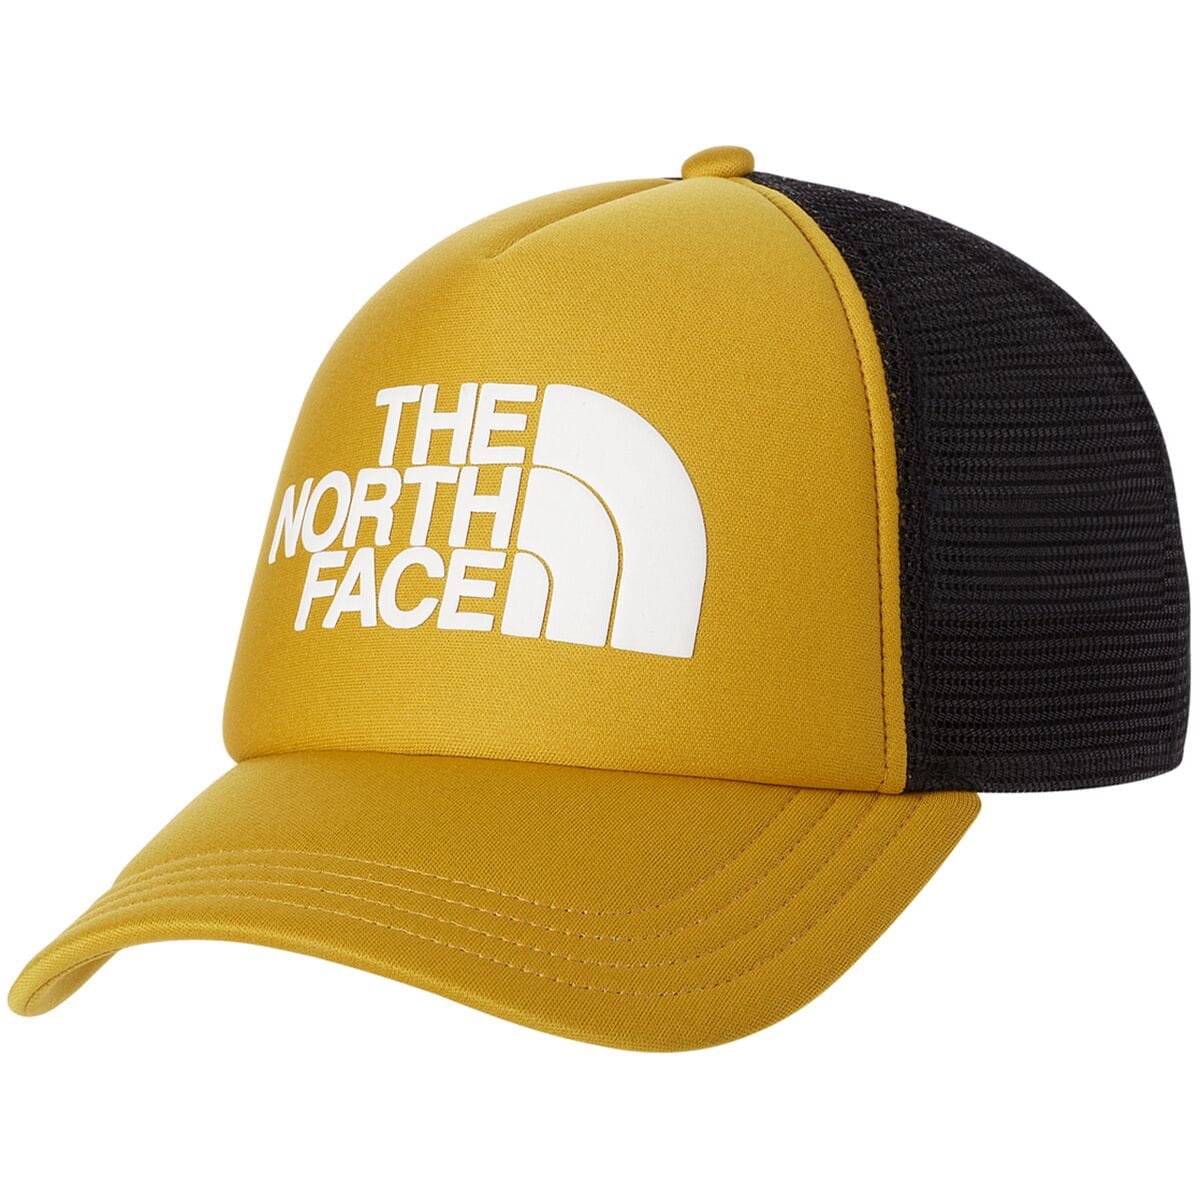 The North Face Men's Trucker Hats | Backcountry.com